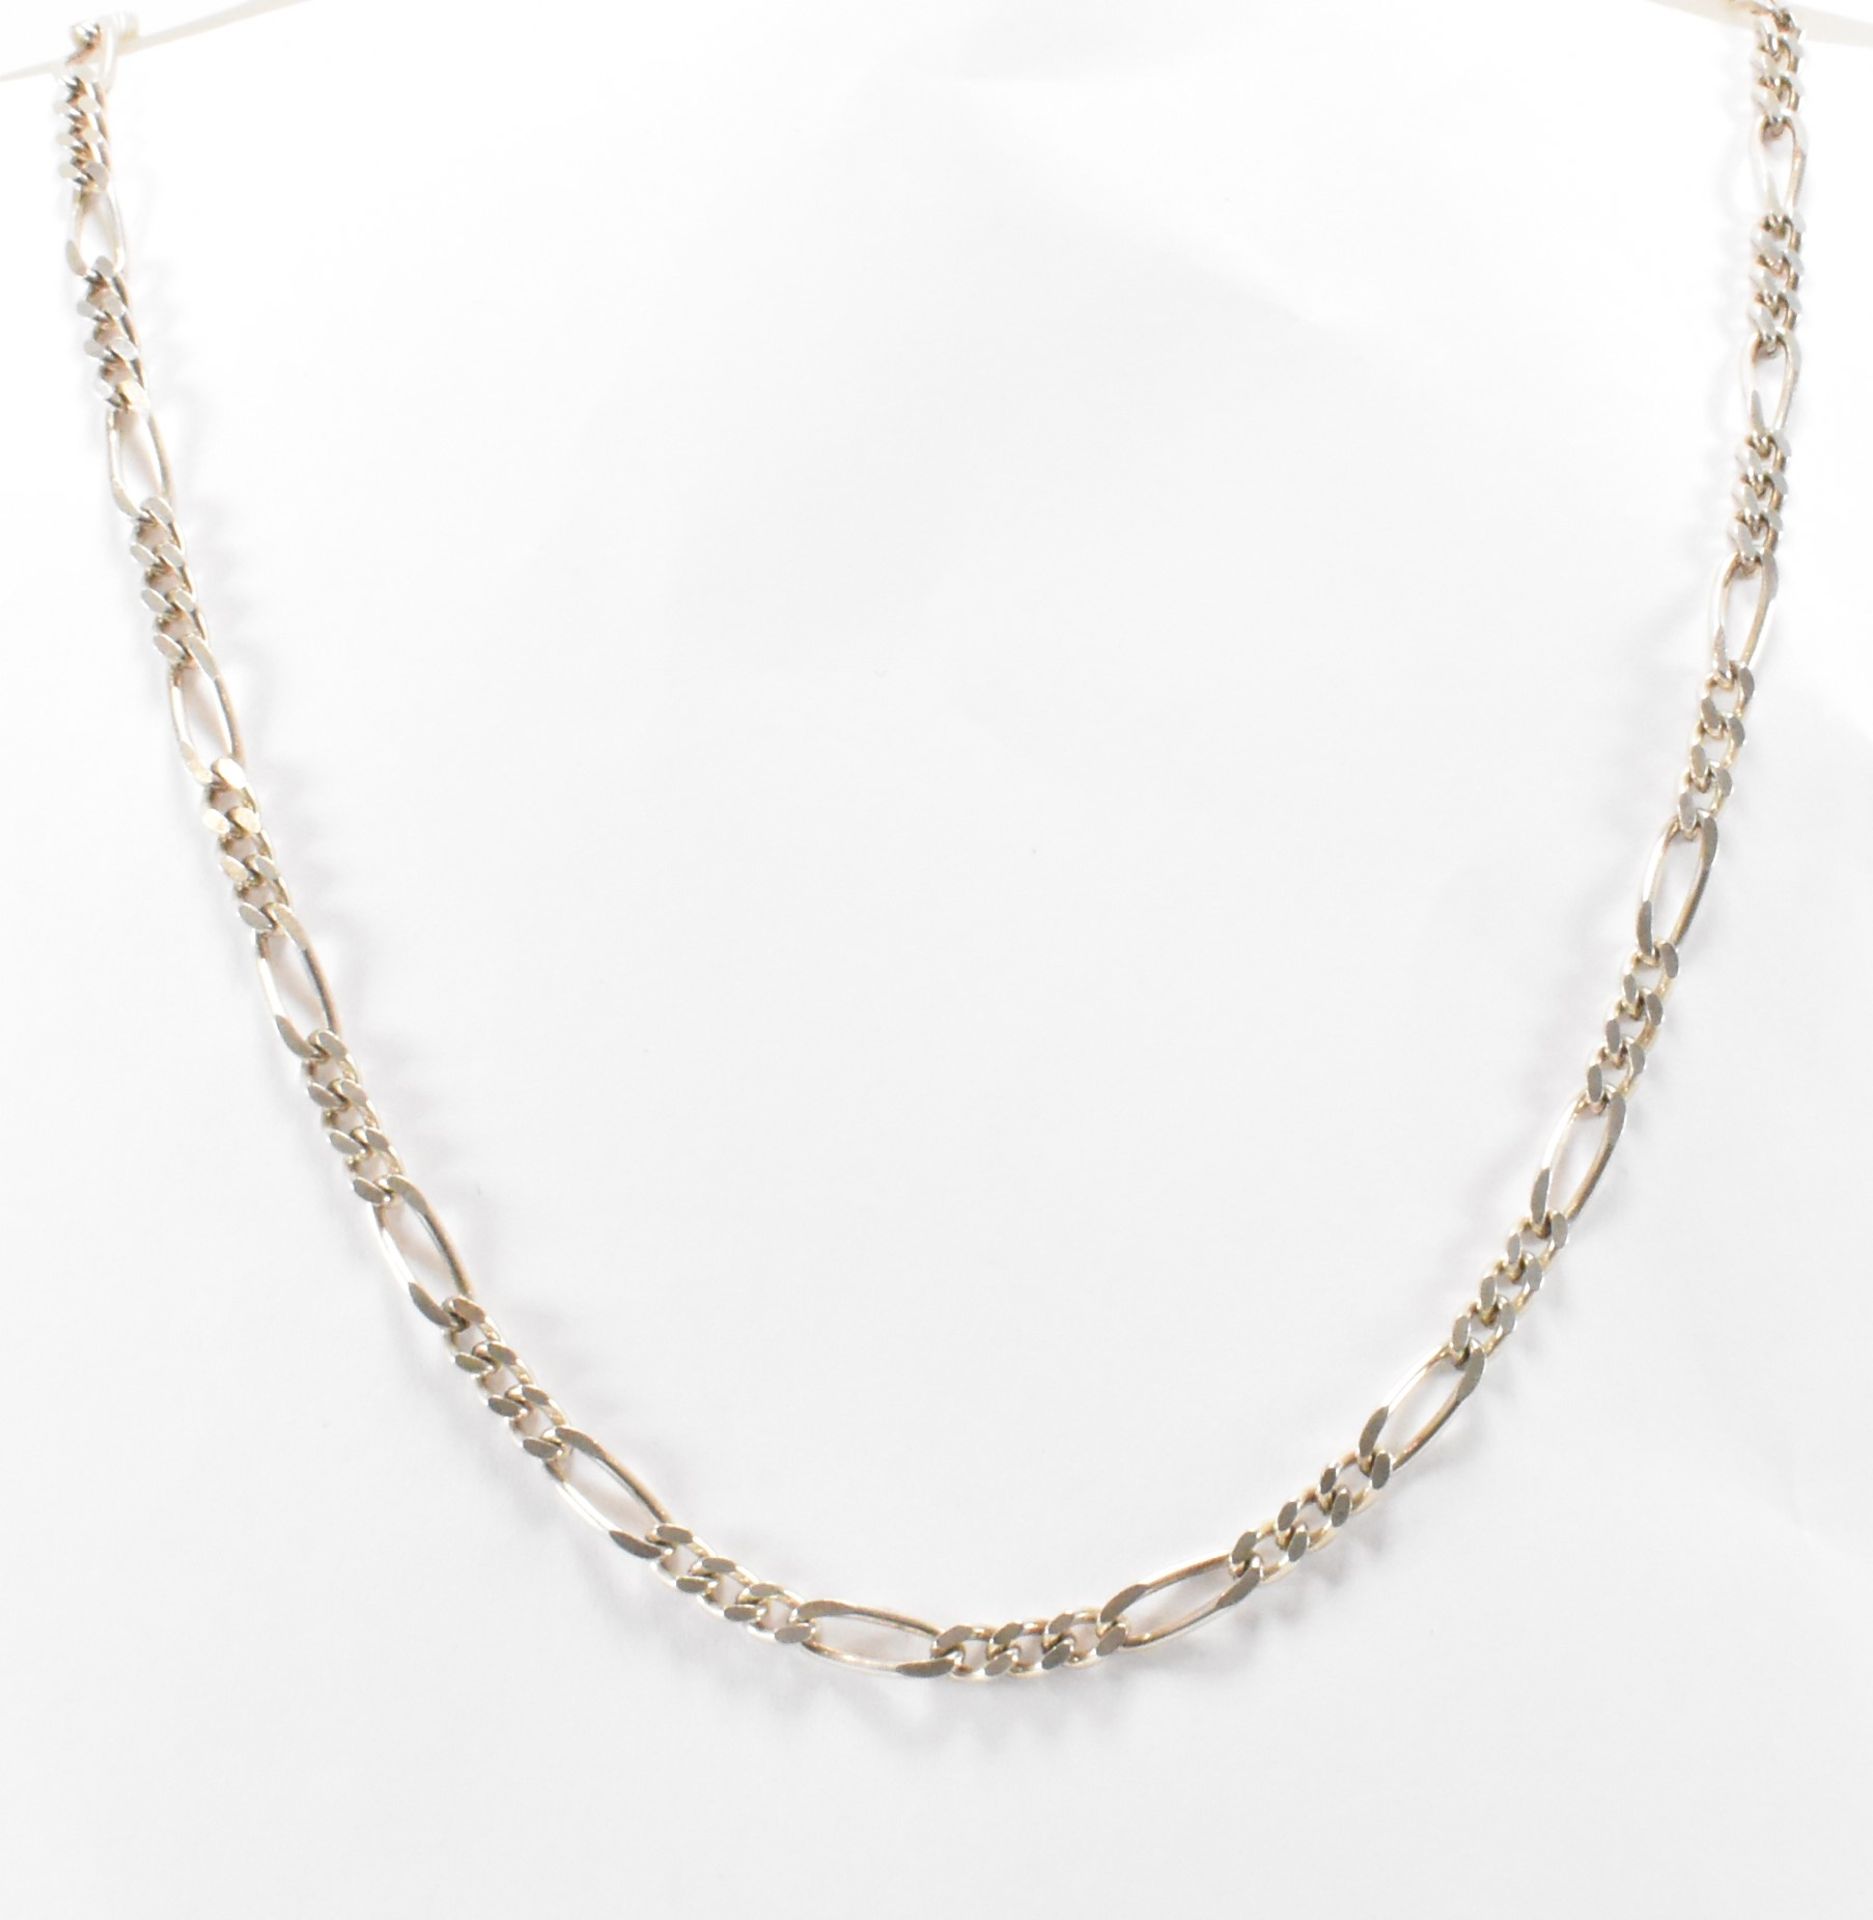 TWO SILVER NECKLACE CHAINS - Image 3 of 7